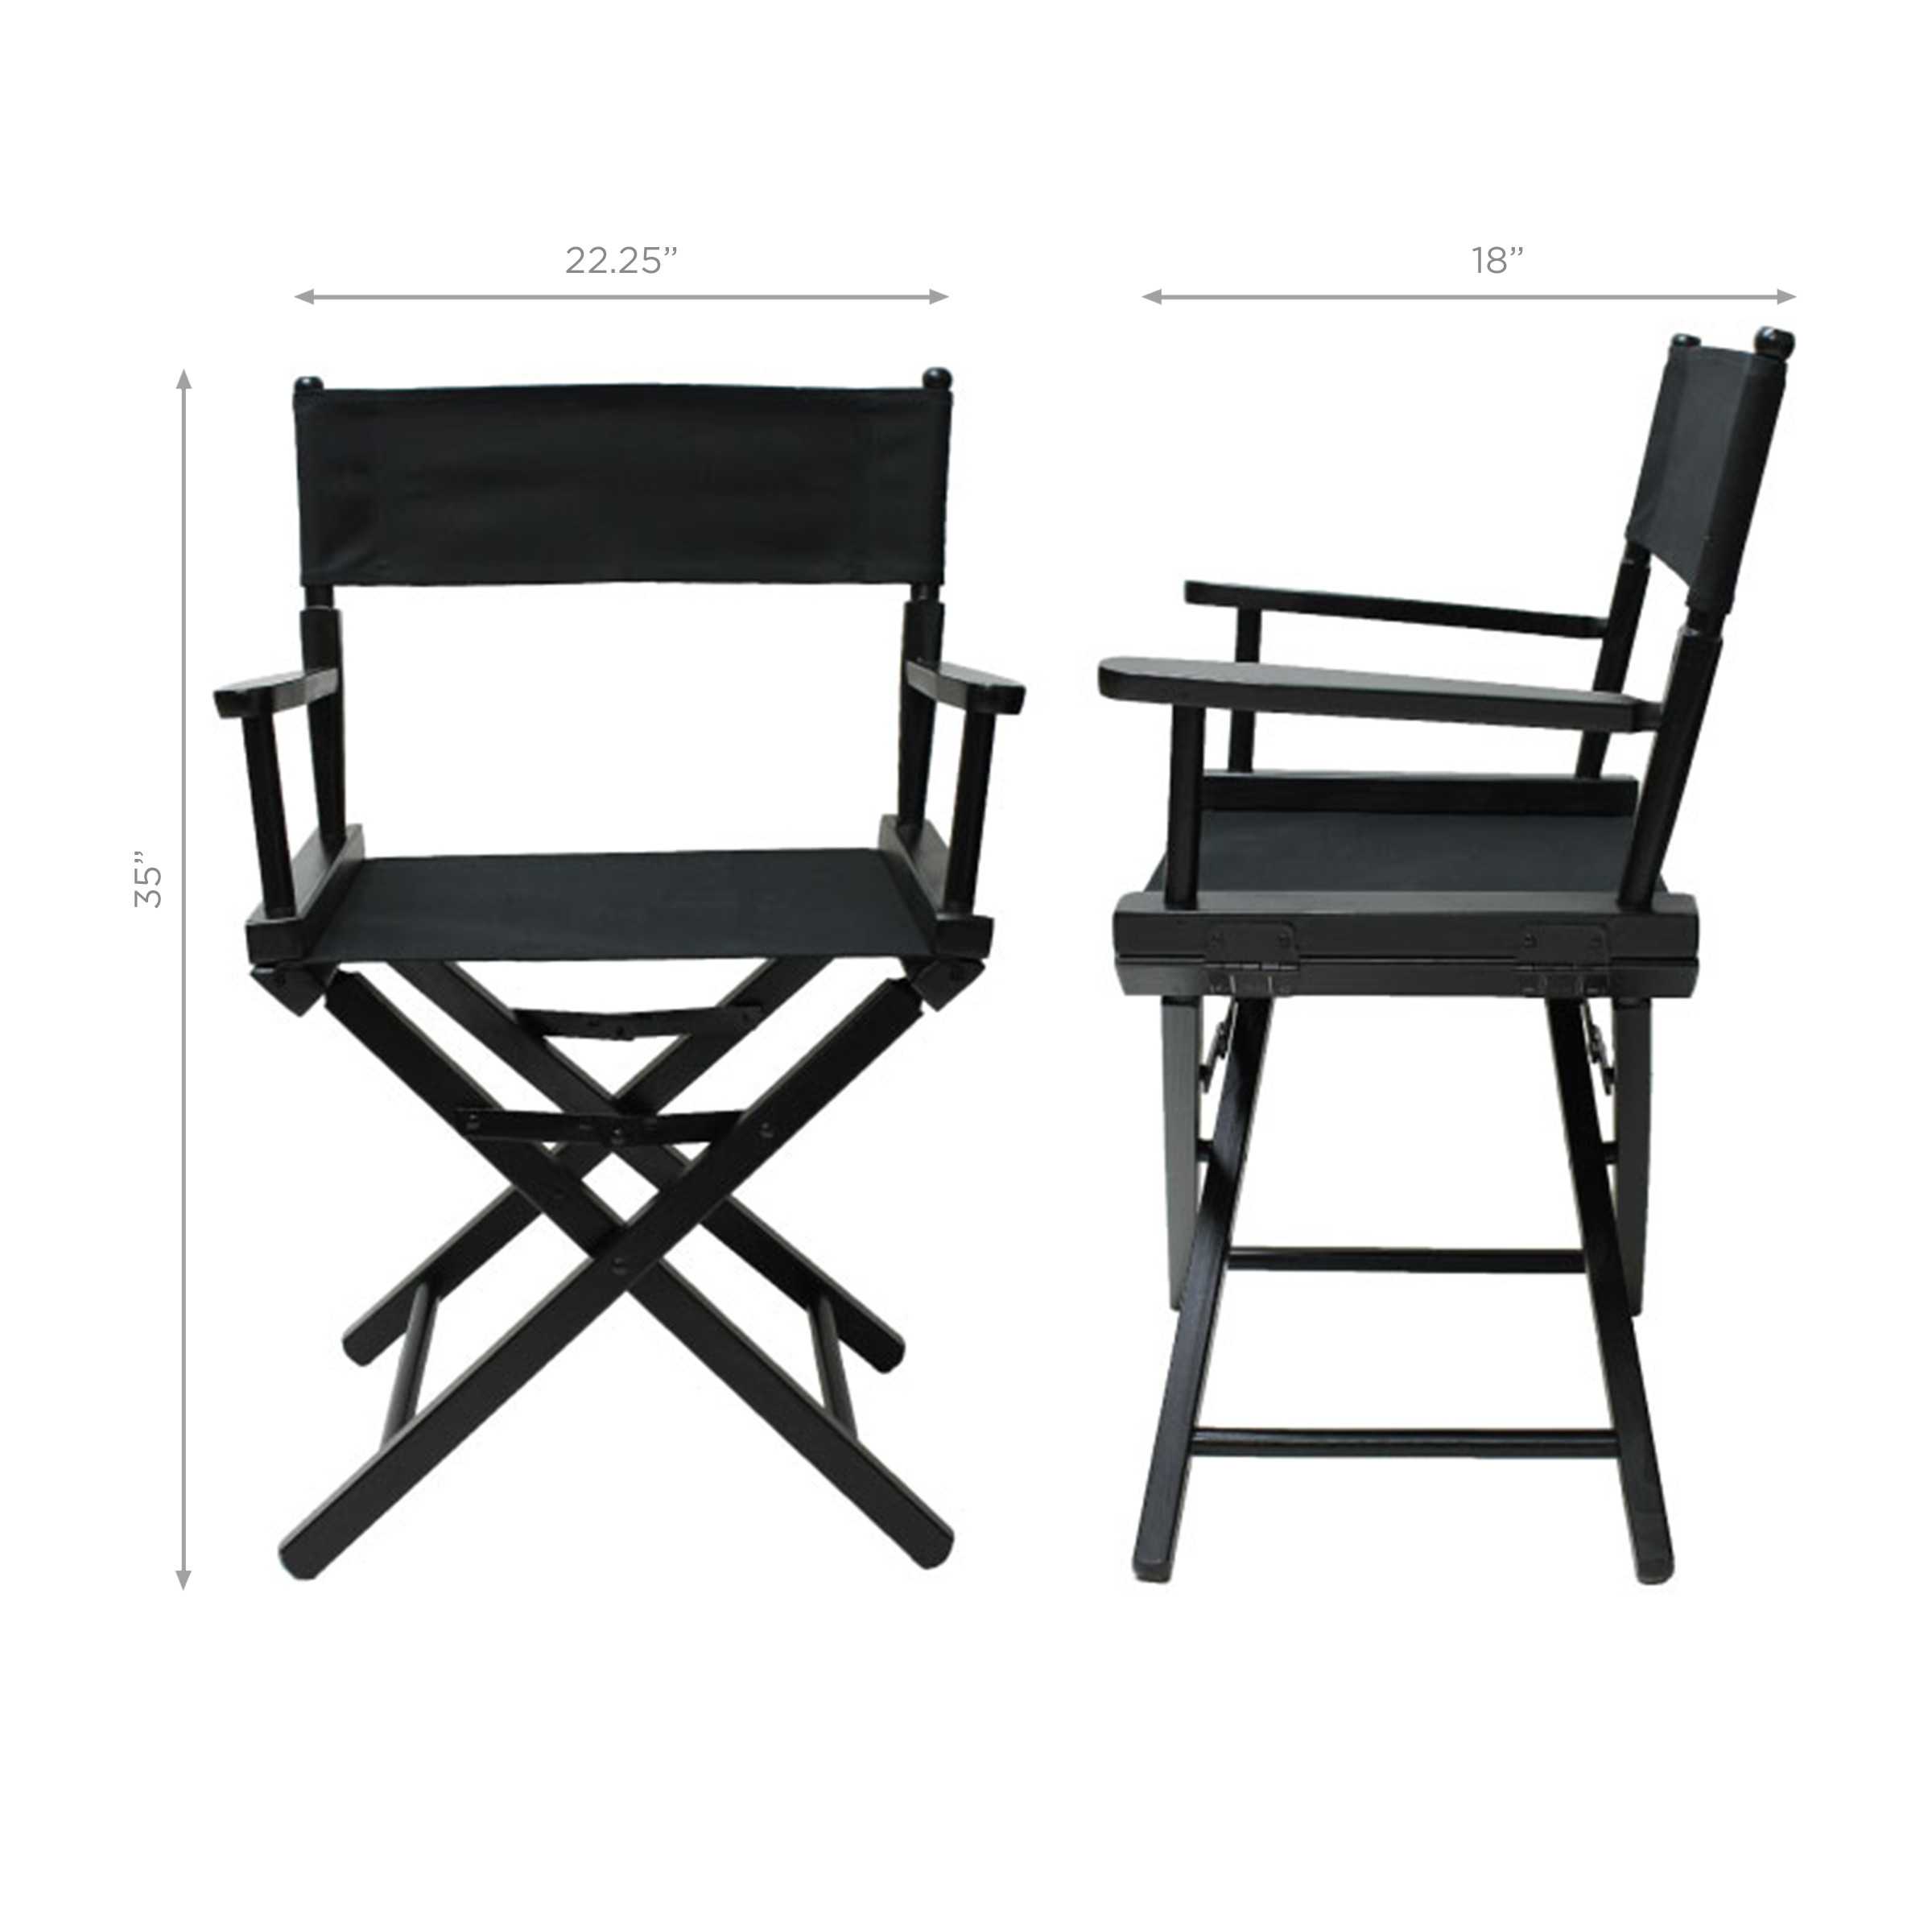 PITTSBURGH STEELERS TABLE HEIGHT DIRECTORS CHAIR